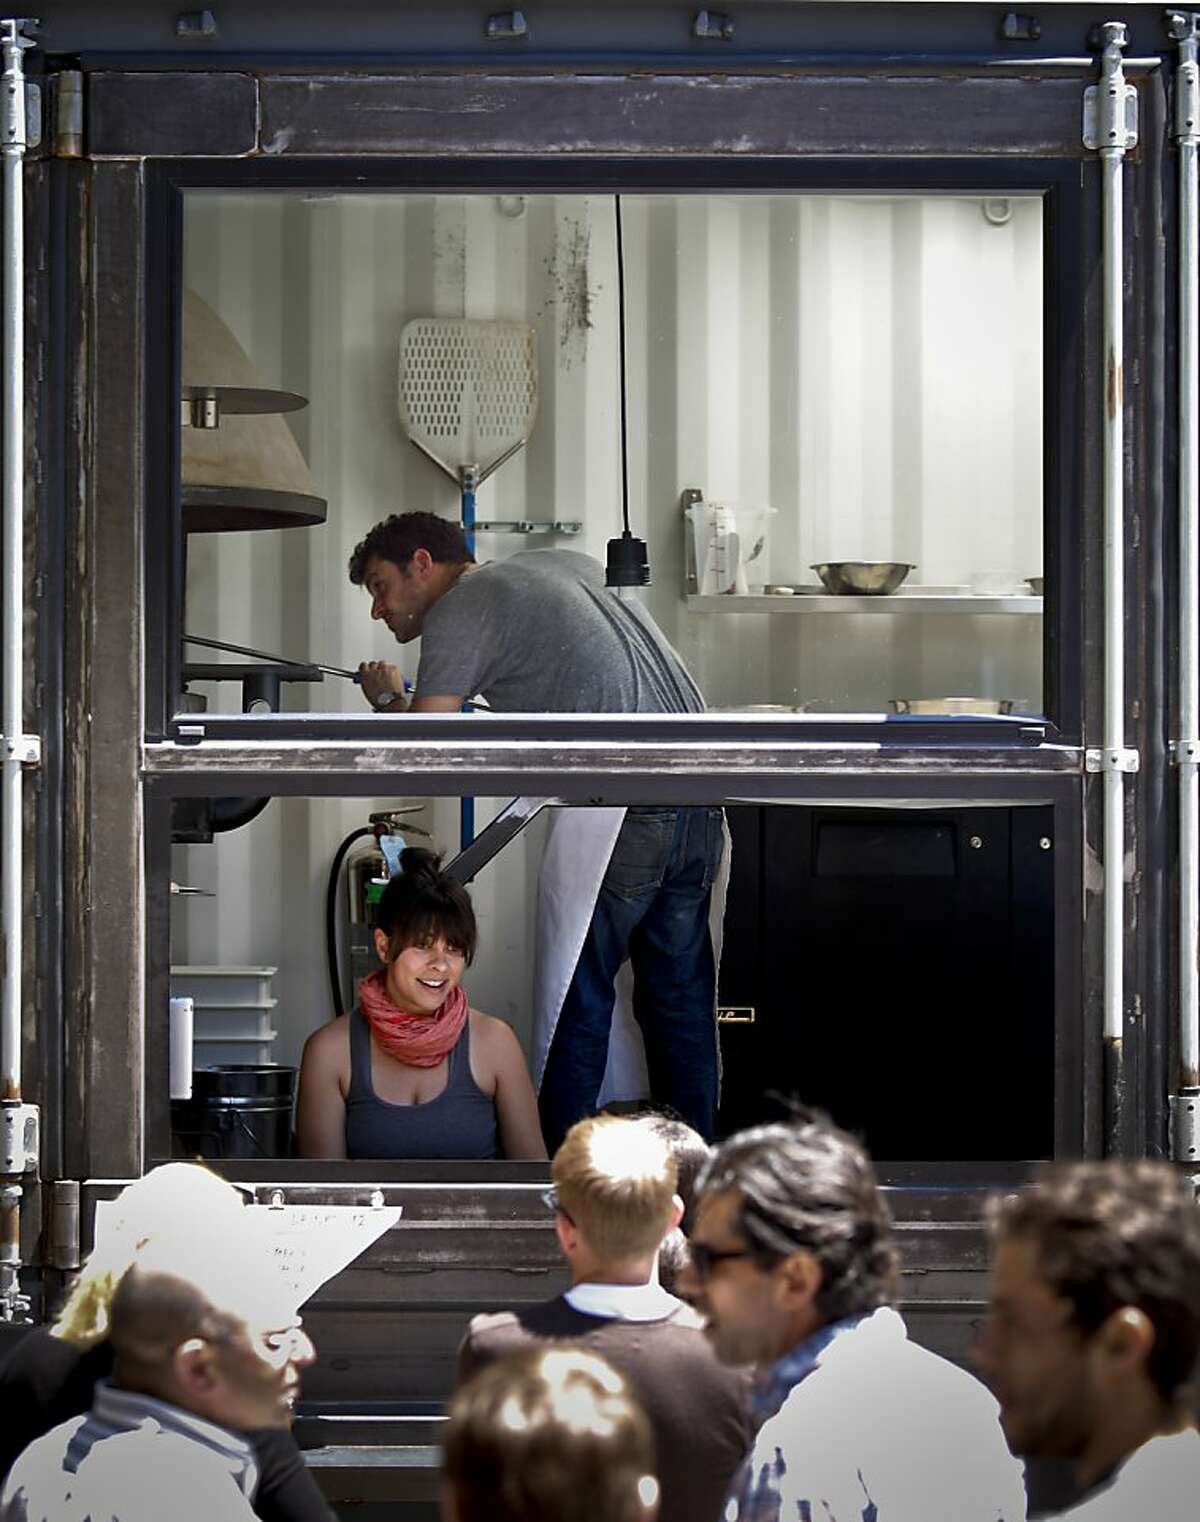 Jonathan Darsky's Del Popolo, a mobile pizzeria housed in a 25ft. shipping container, is seen on Thursday, June 7, 2012 at Mint Plaza in San Francisco, Calif.